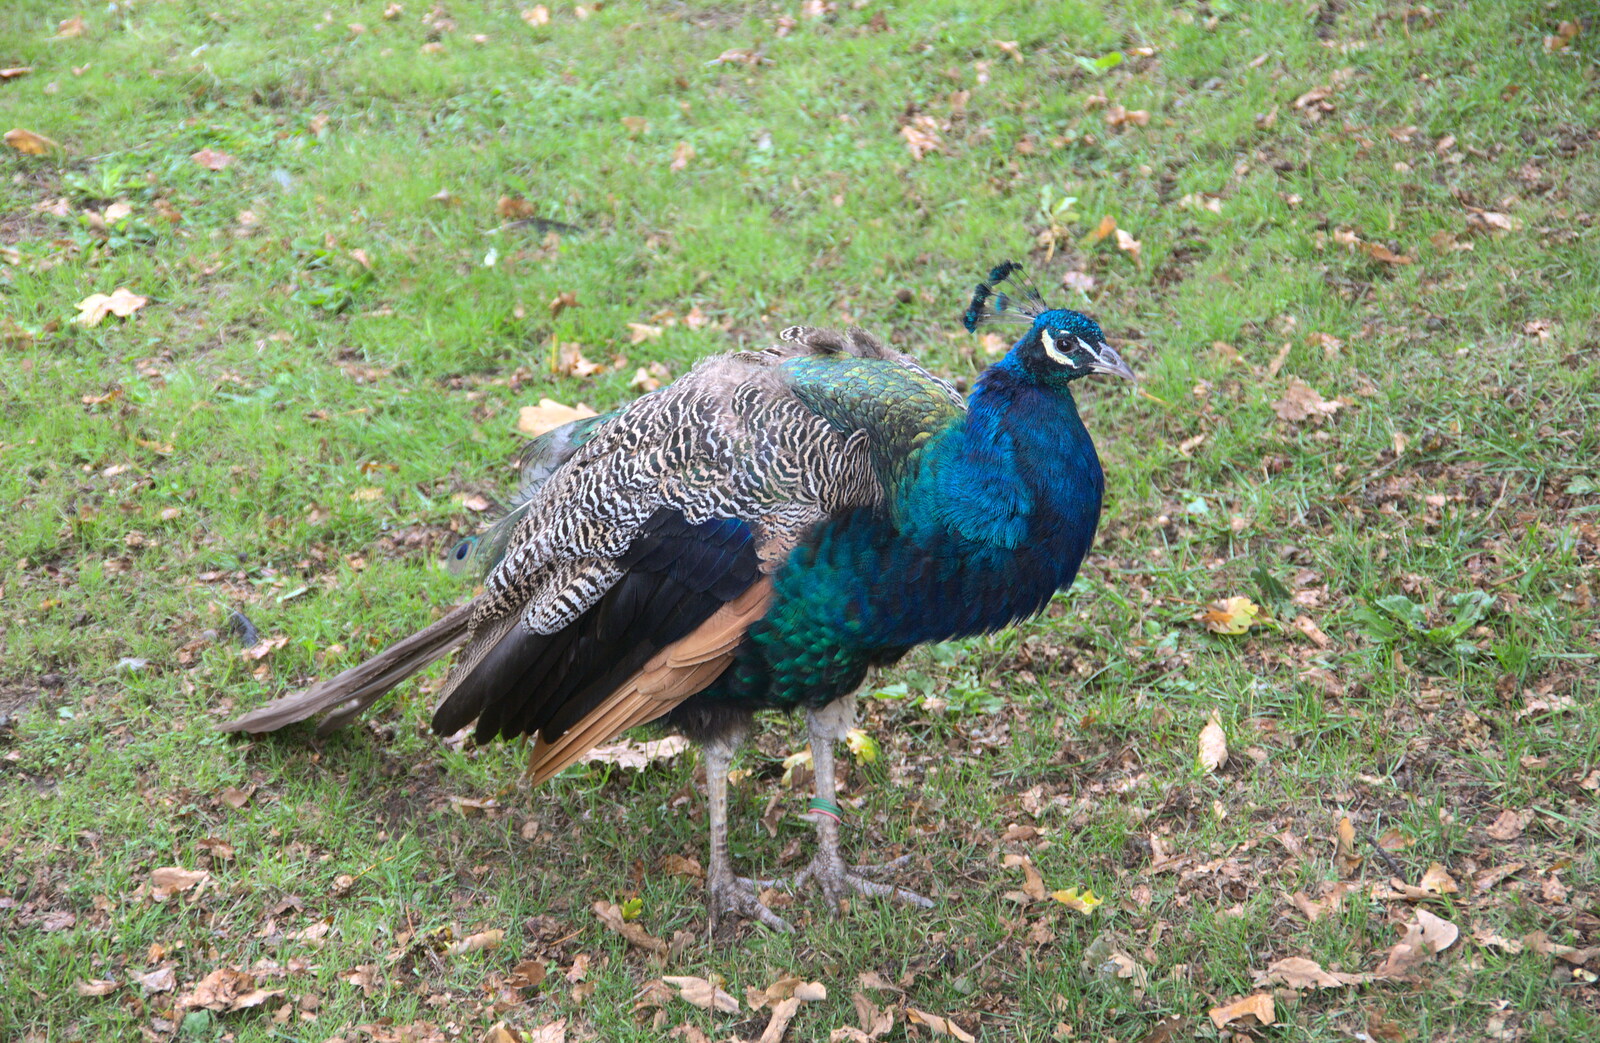 A peacock roams around from A Day at Warwick Castle, Warwickshire - 8th September 2018